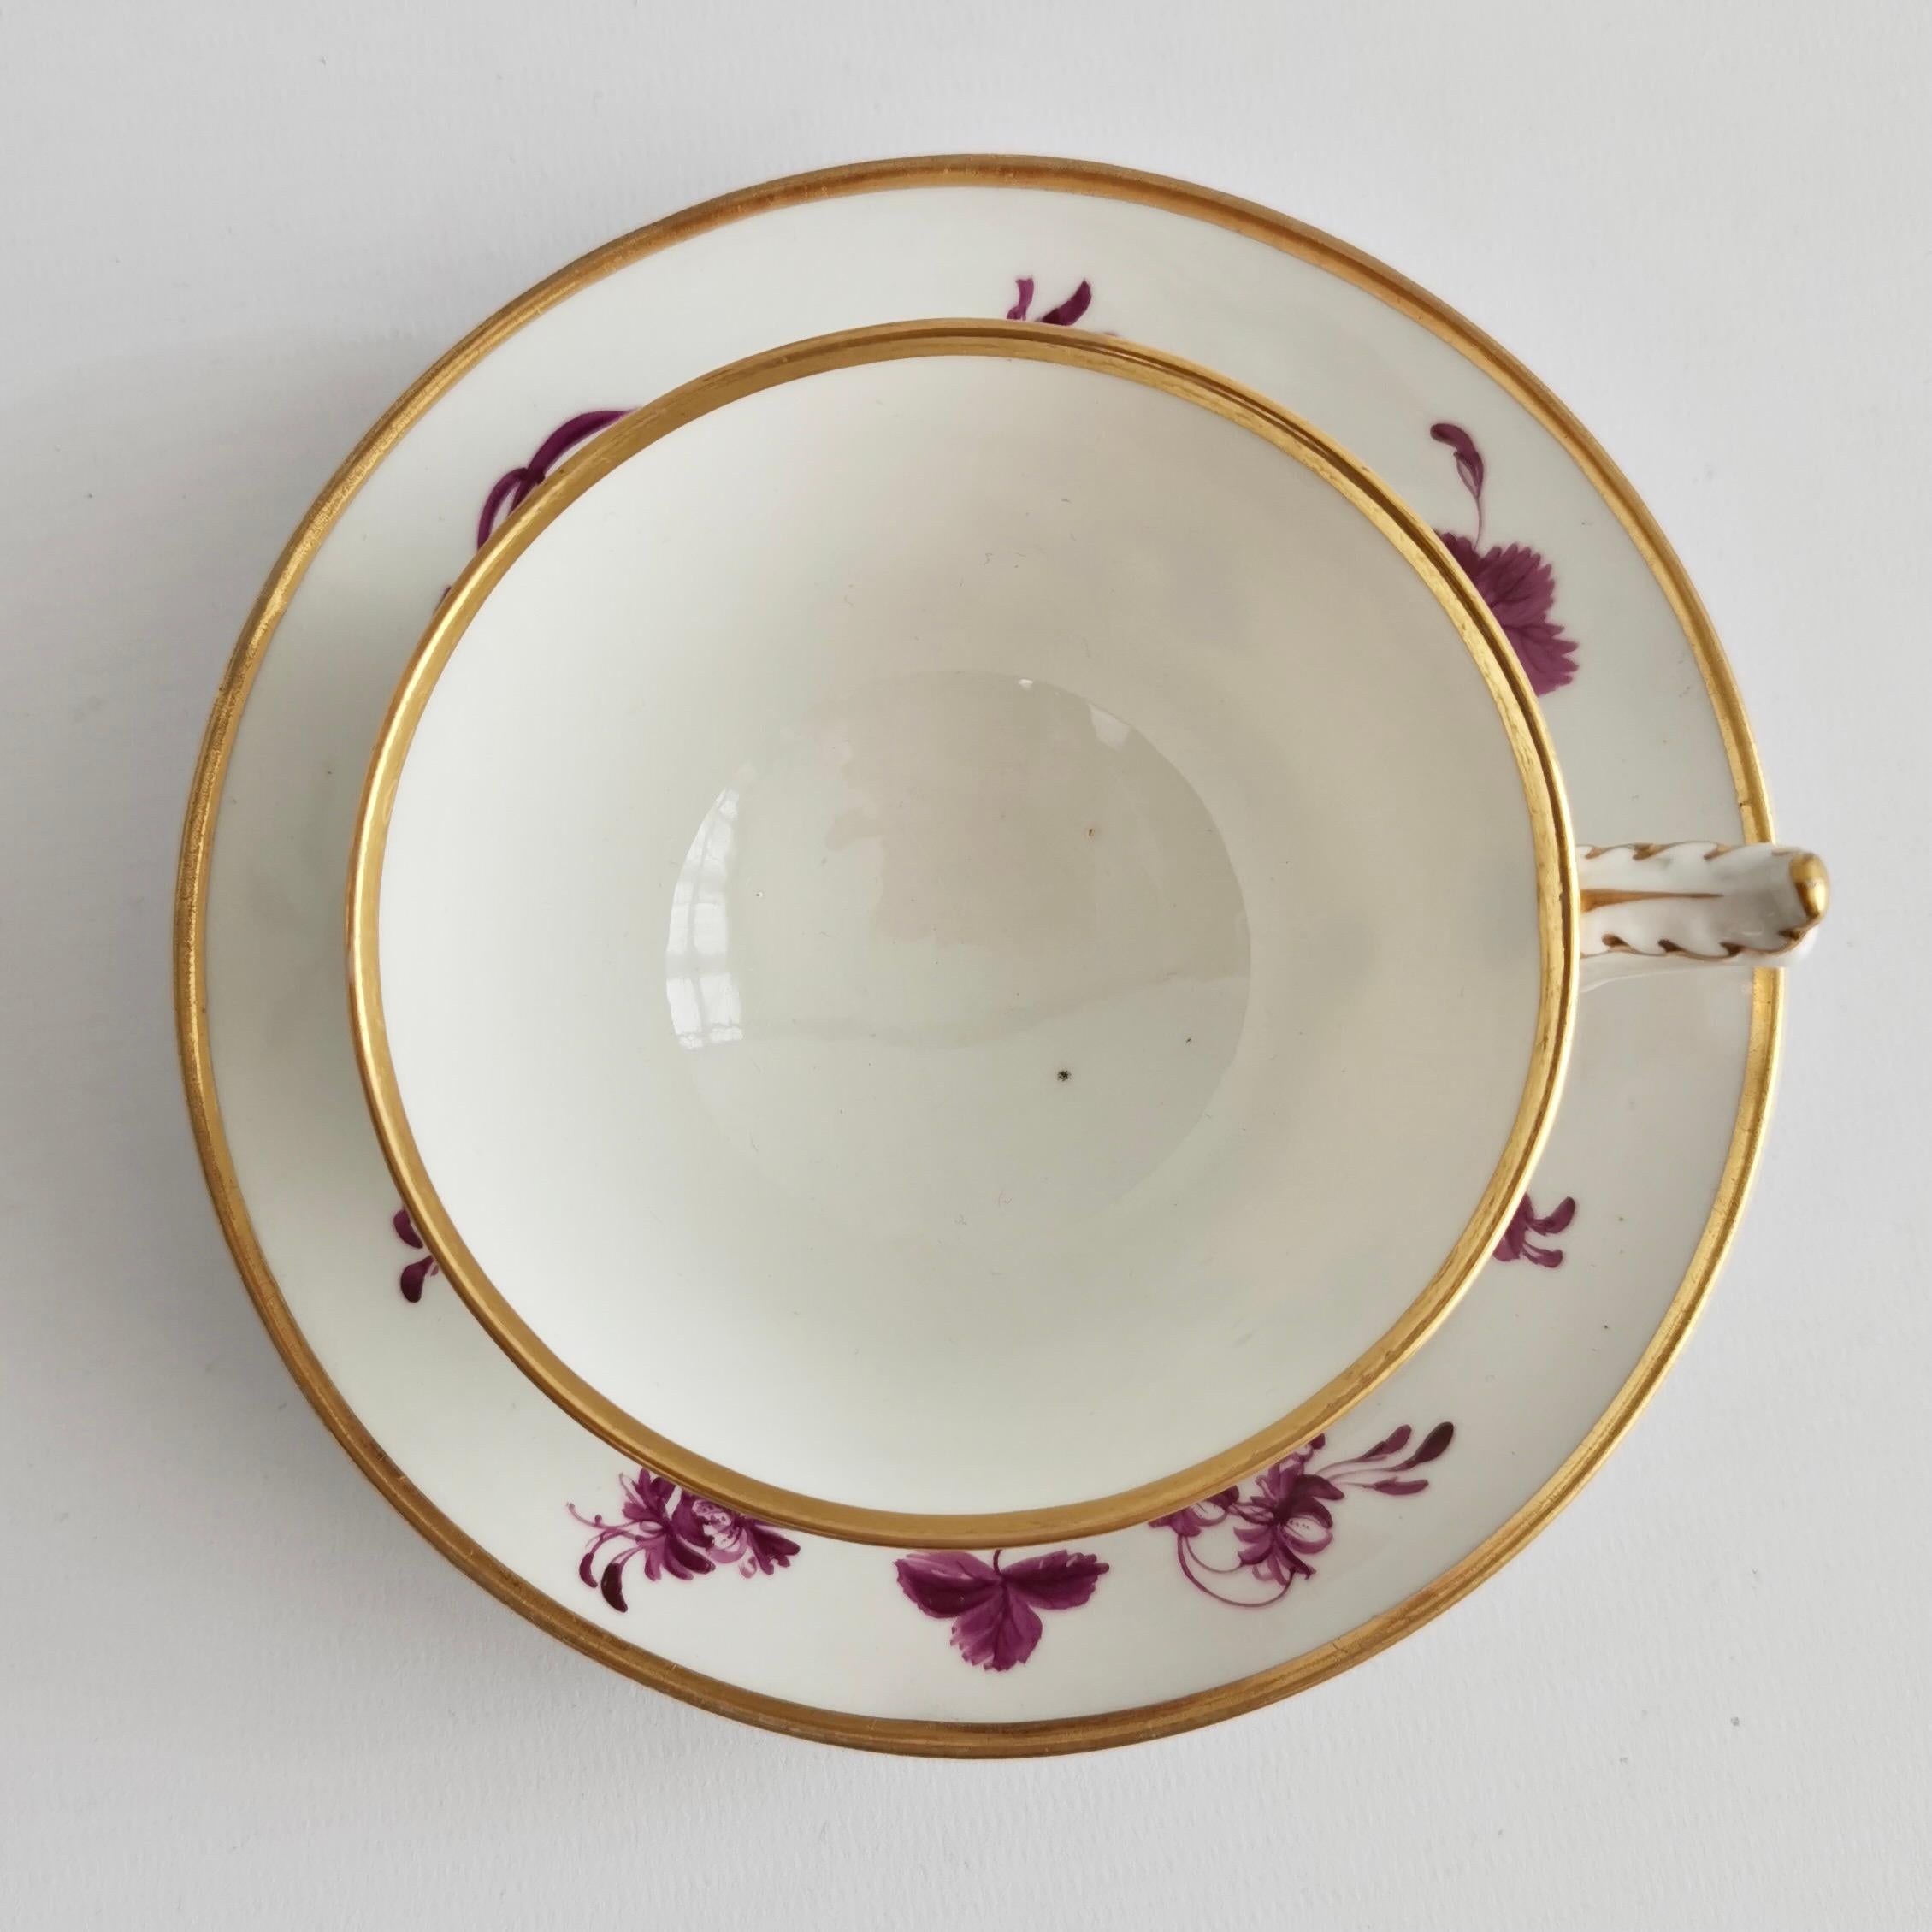 Hand-Painted Flight Barr and Barr Teacup, White with Puce Flowers, Regency ca 1815